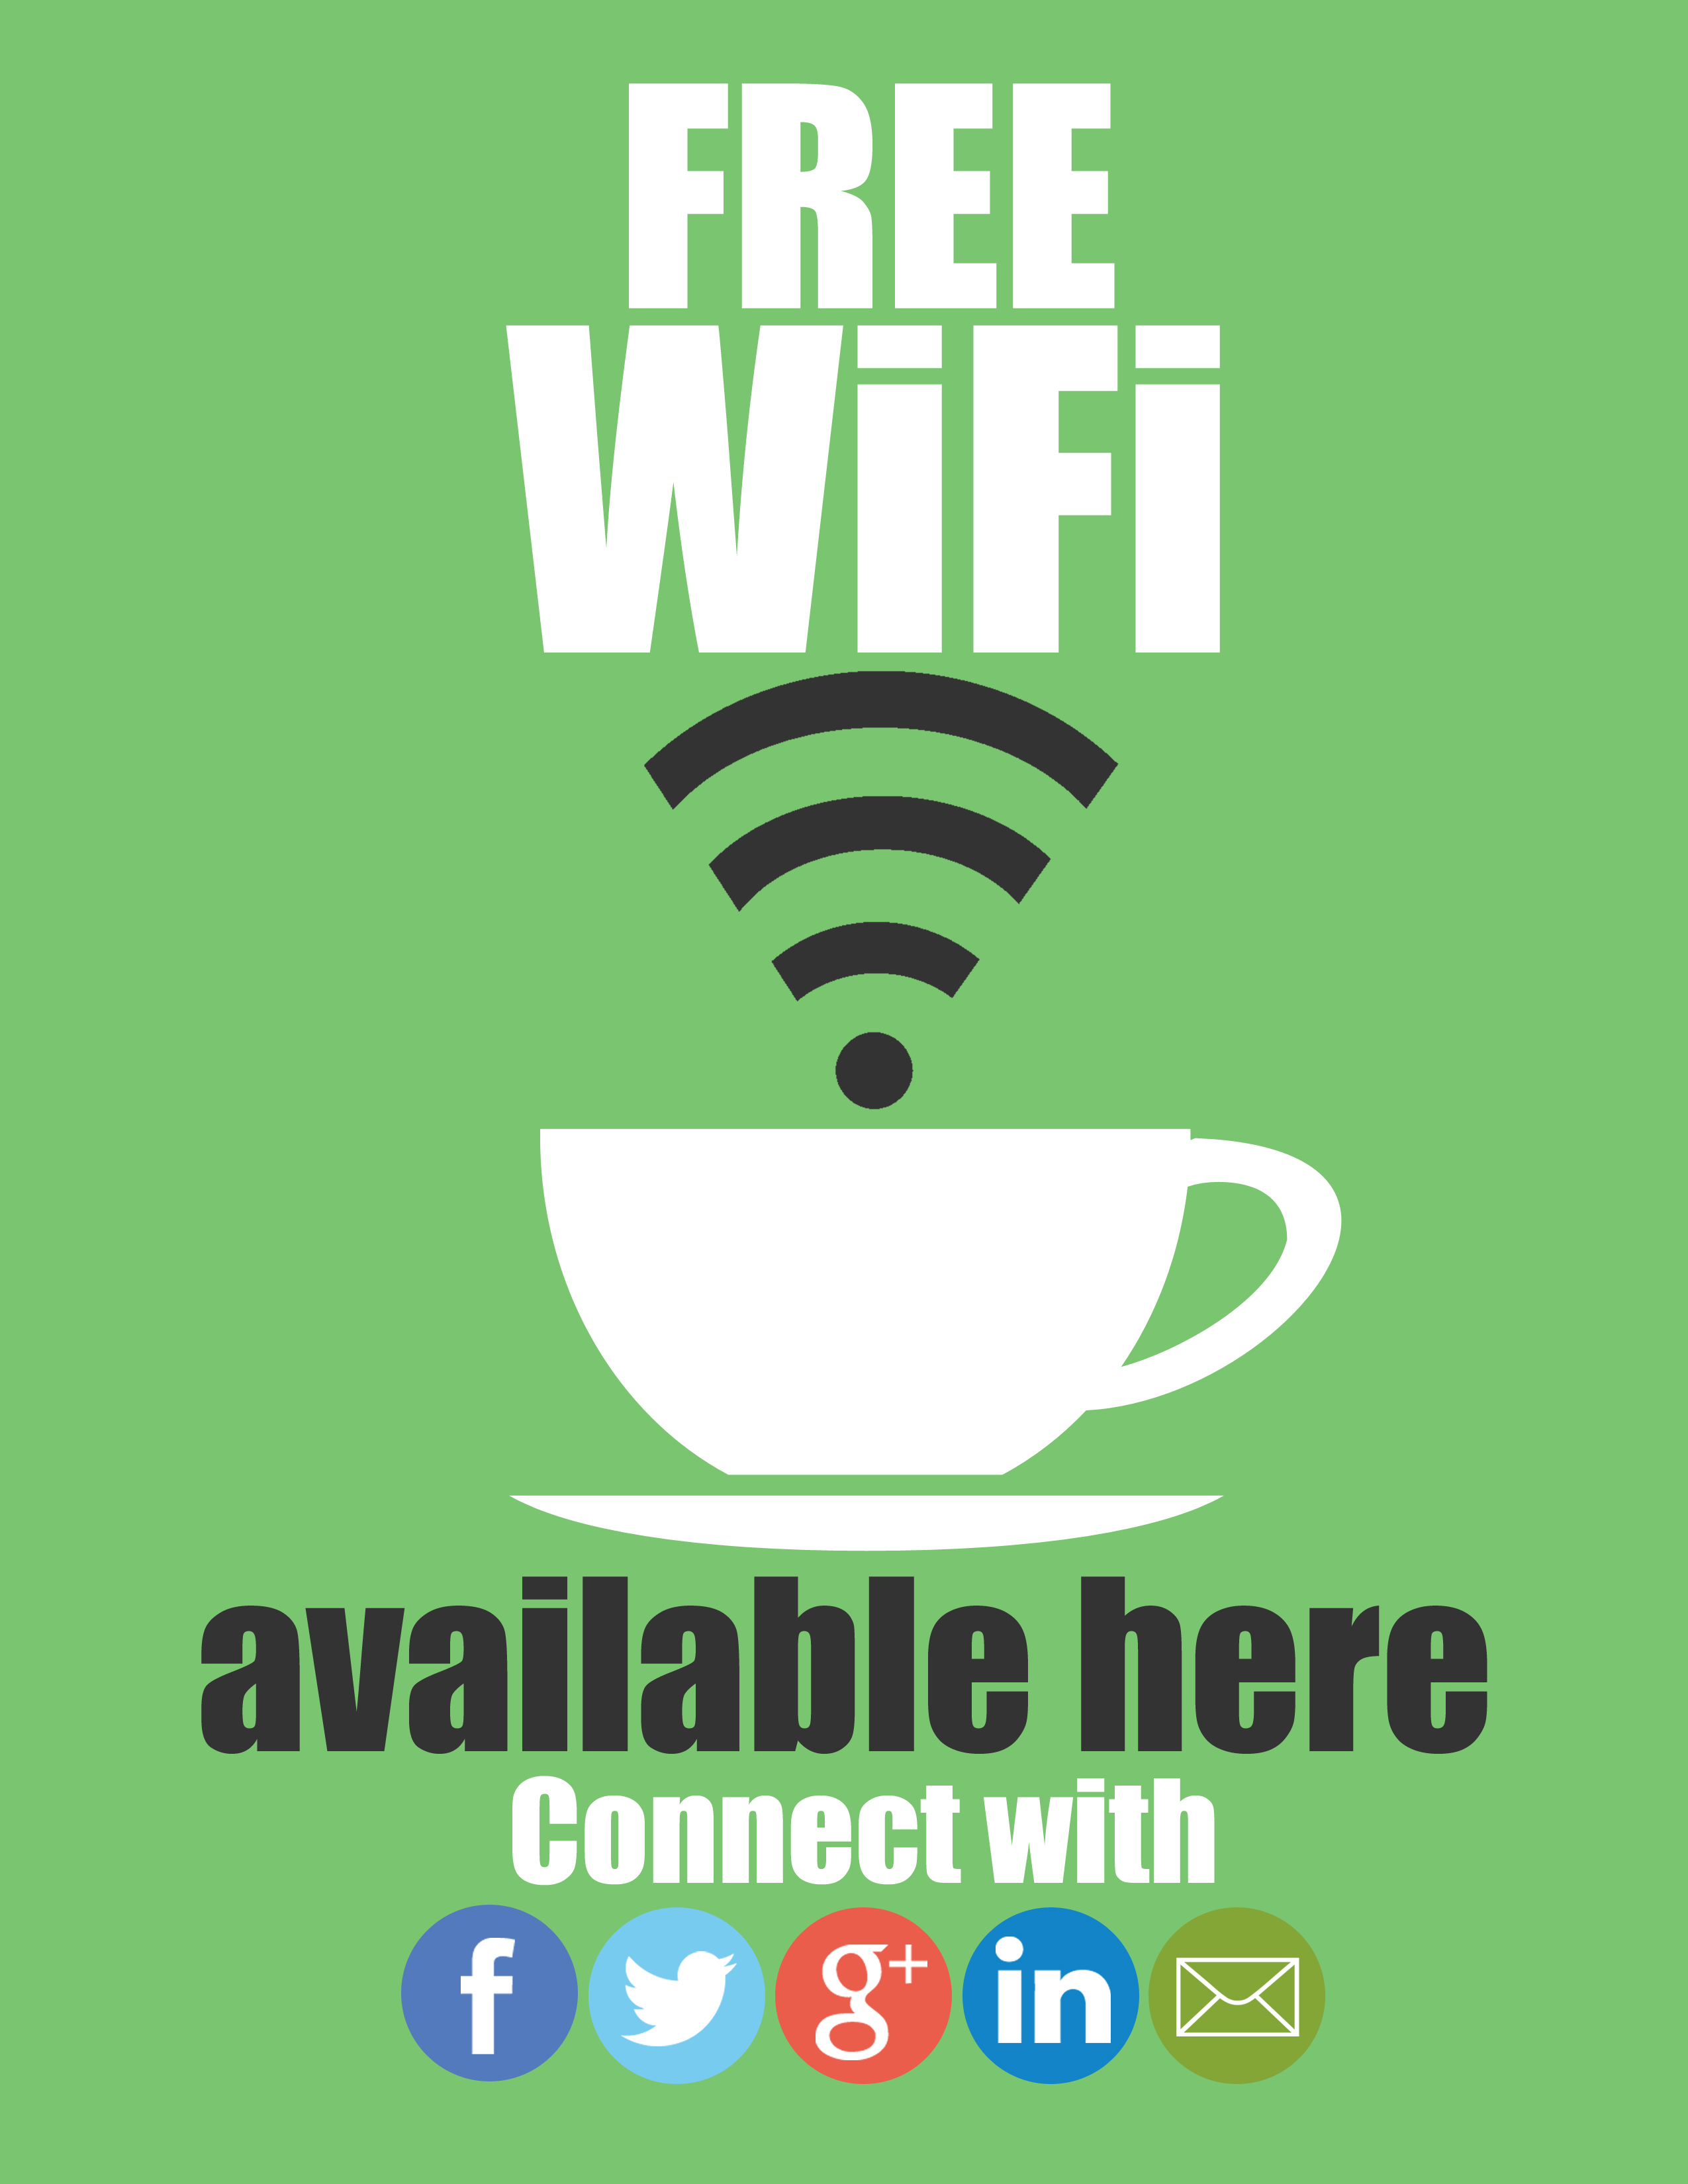 How to Set Up Free WiFi Hotspot For Business Customers